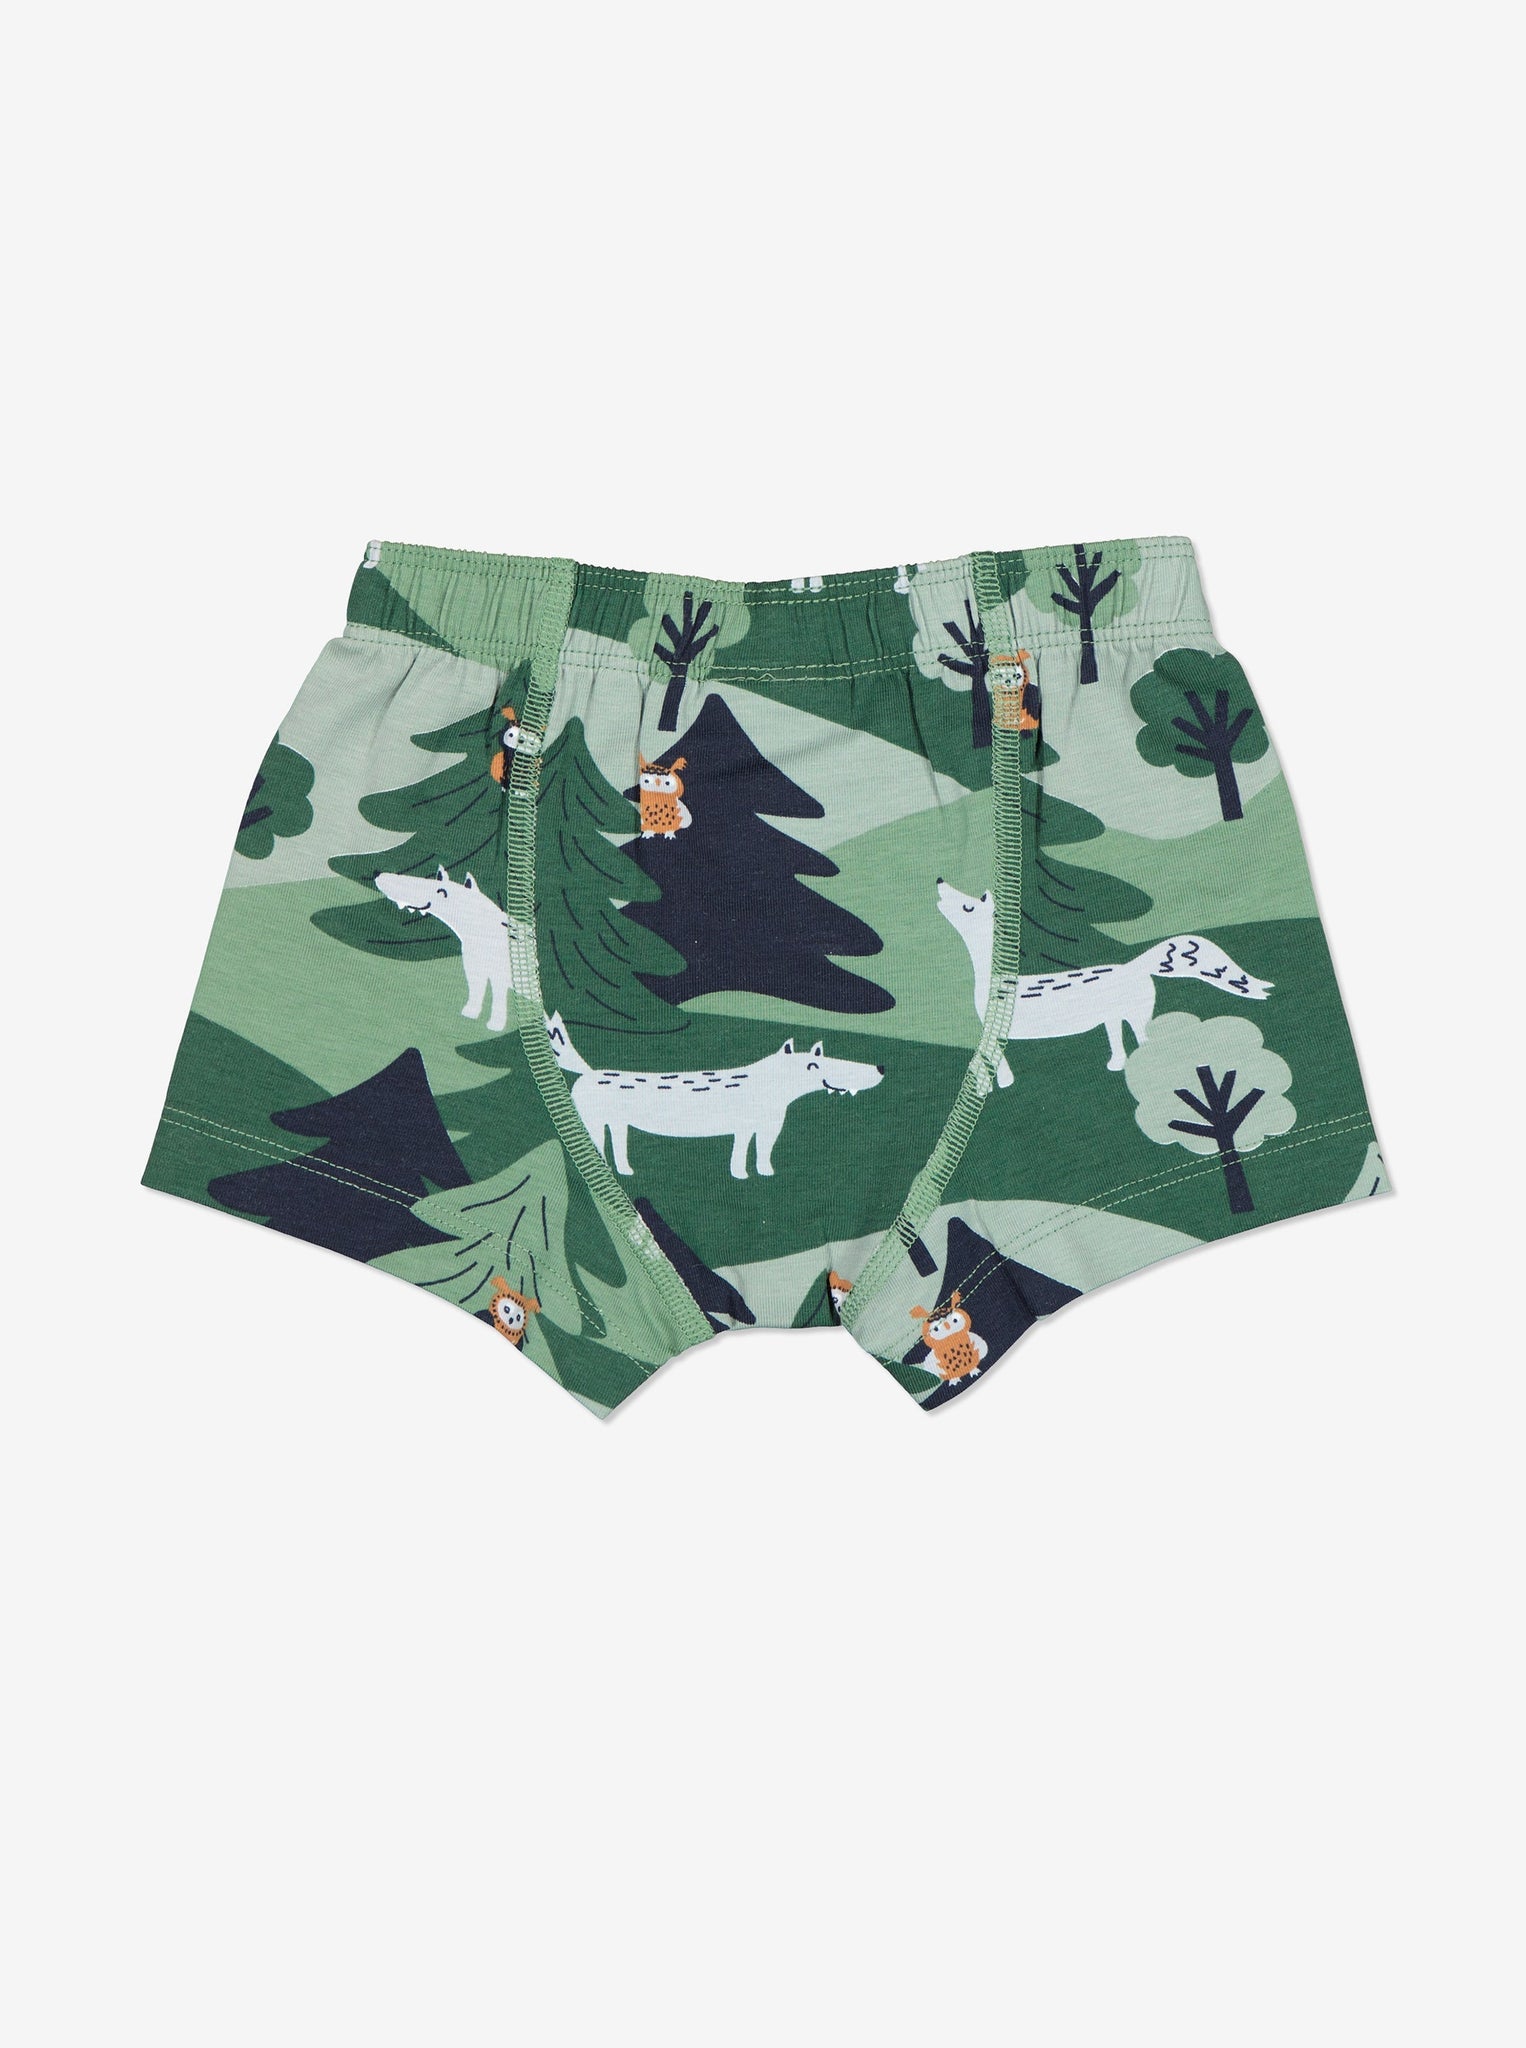 Organic Cotton Green Boys Boxer Shorts from the Polarn O. Pyret kidswear collection. Ethically produced kids clothing.